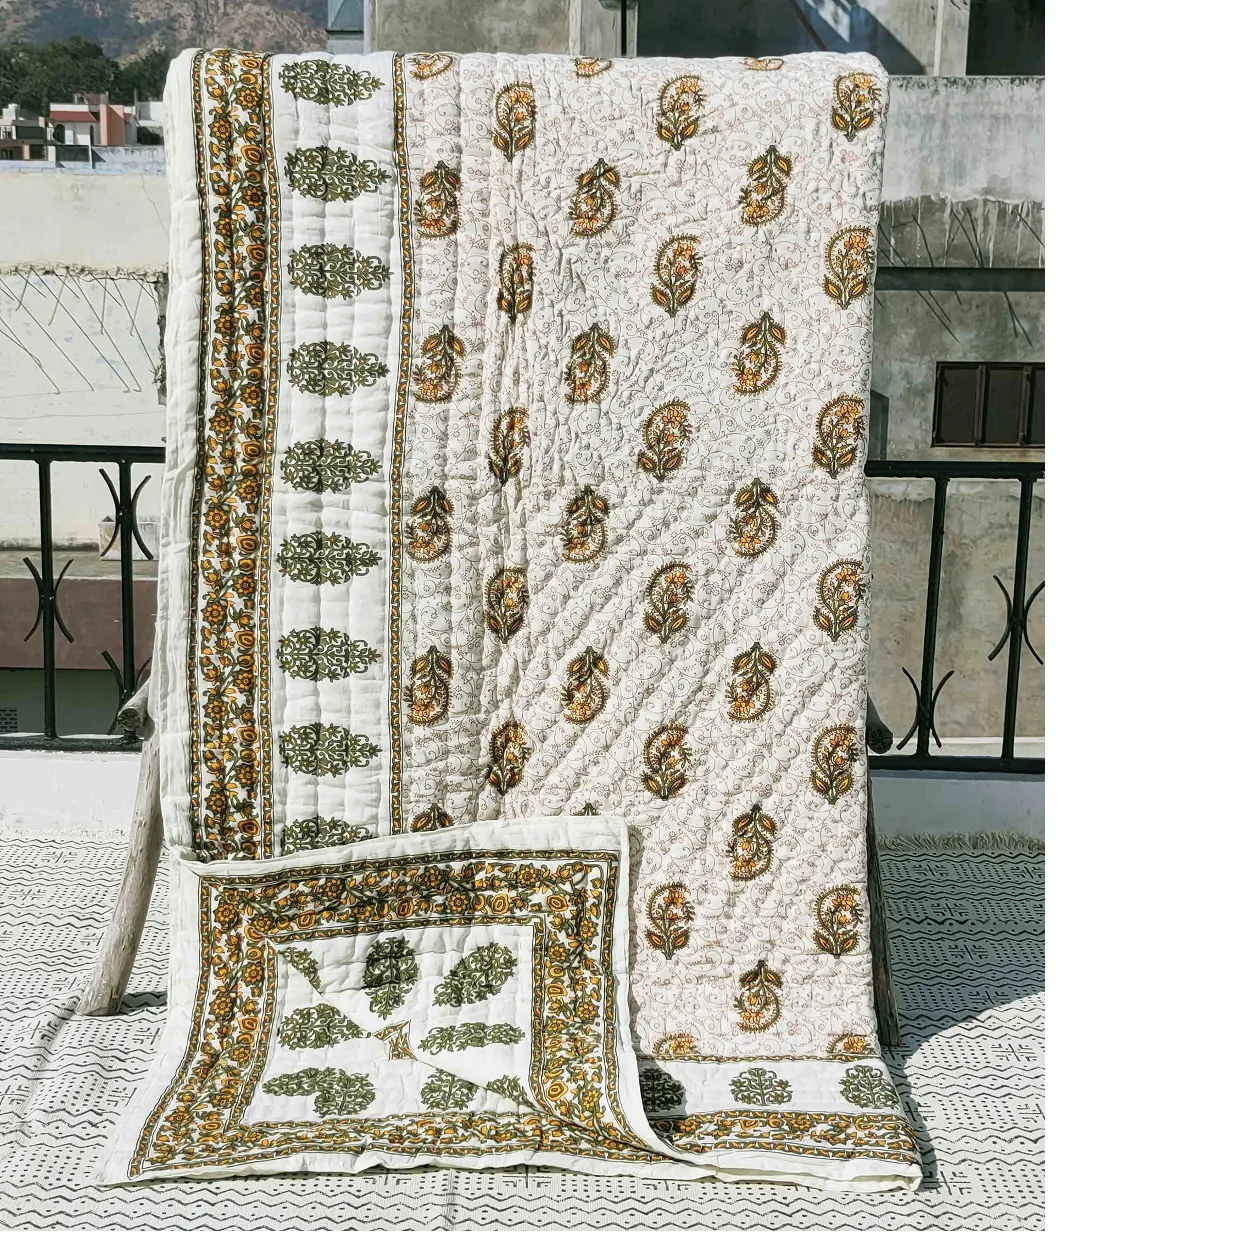 double sided ethnic Indian print hand block printed cotton quilts for home decor stores and home textile stores for resale